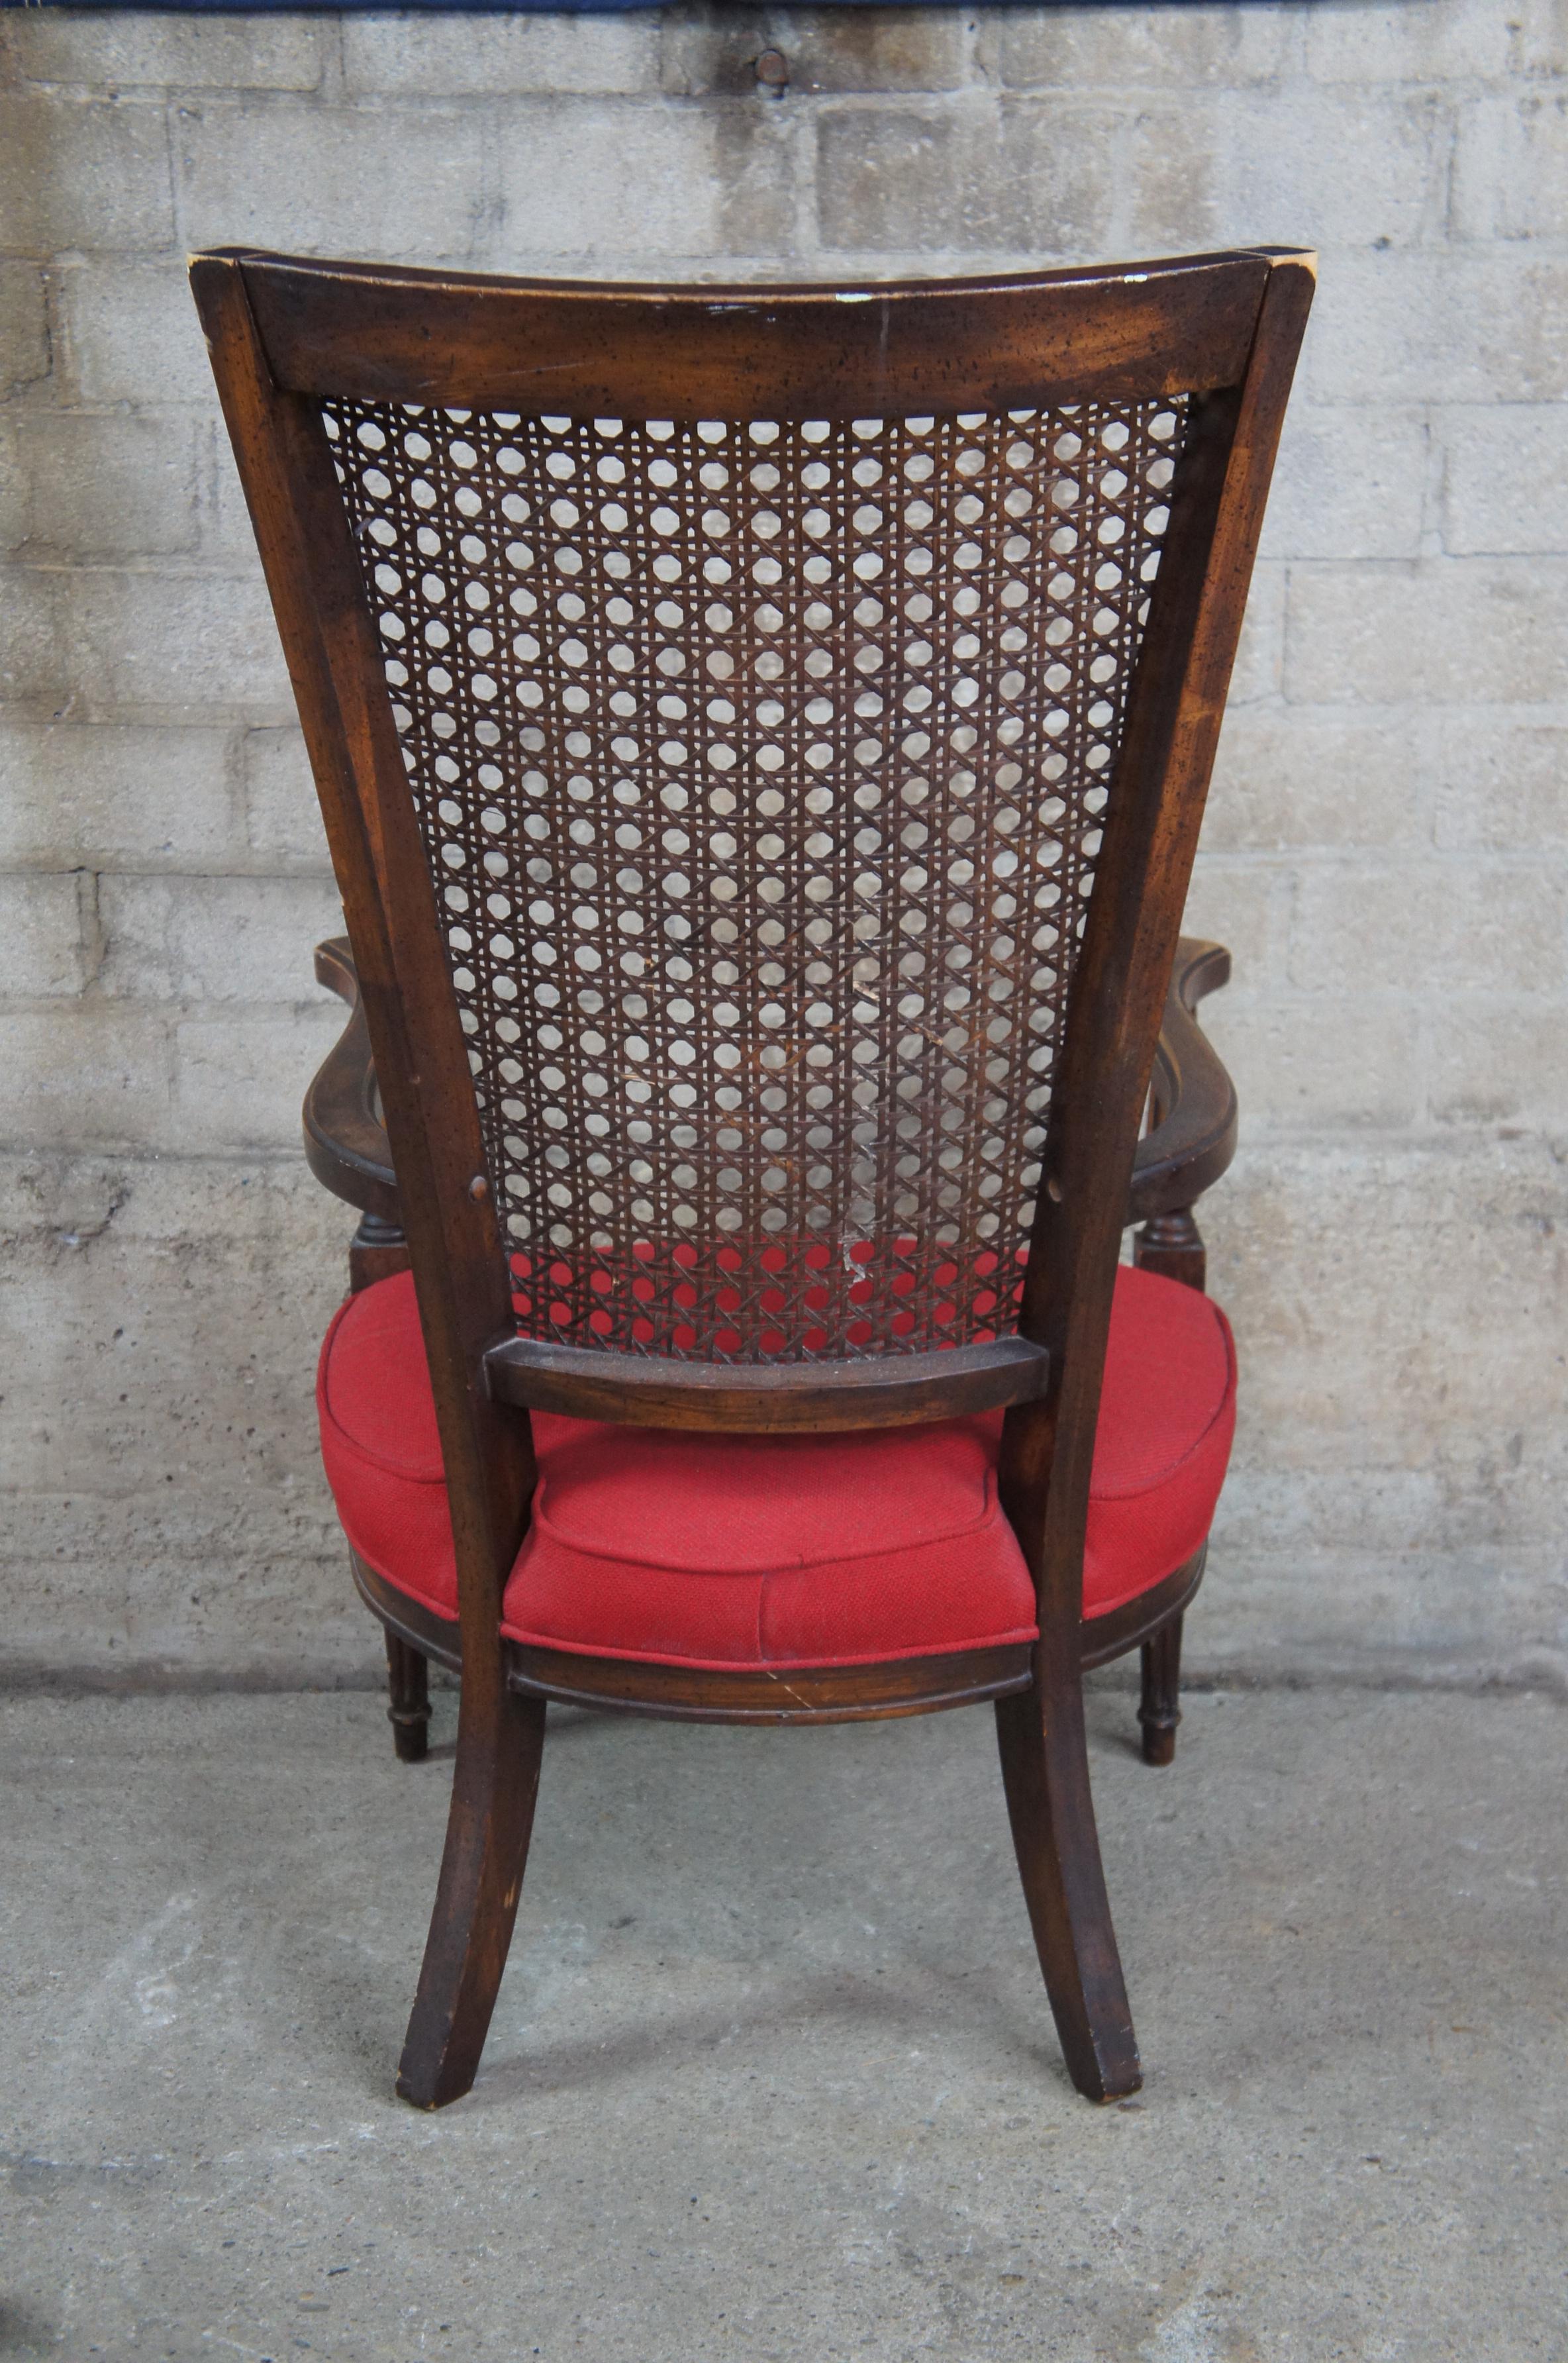 20th Century French Armchair Distressed Walnut Caned Back Red Seat For Sale 1